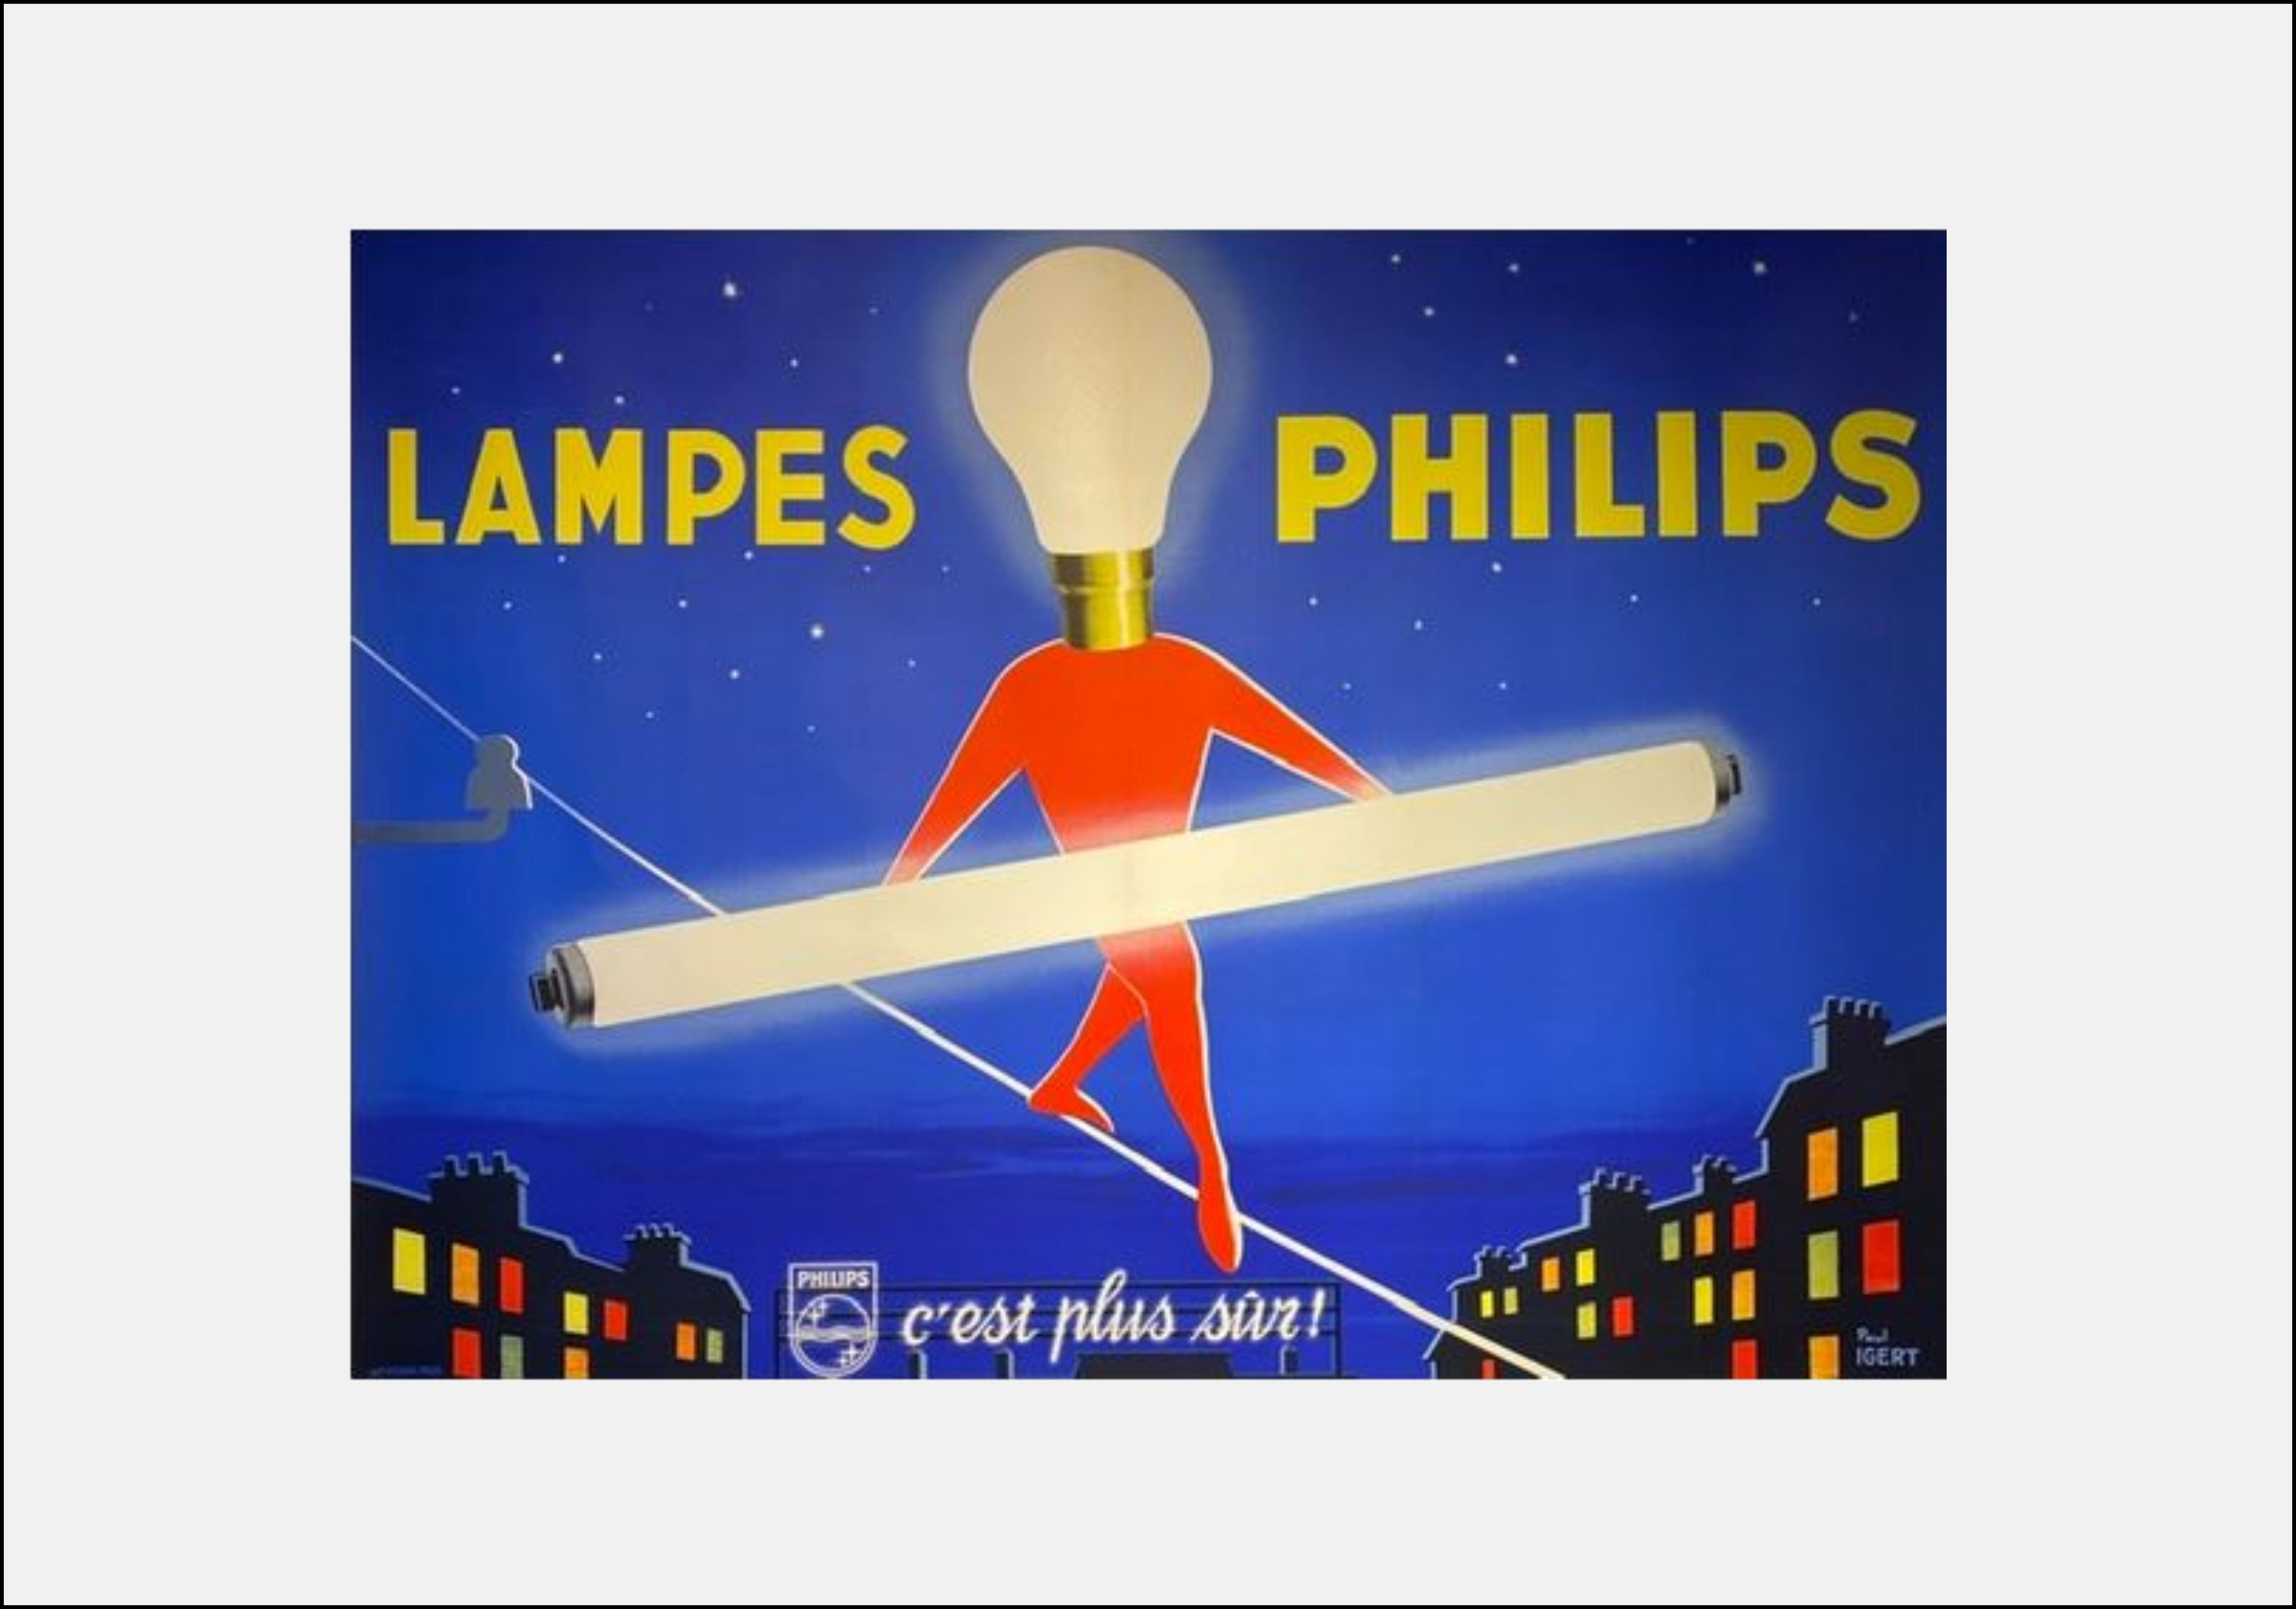 Lampes Phillips